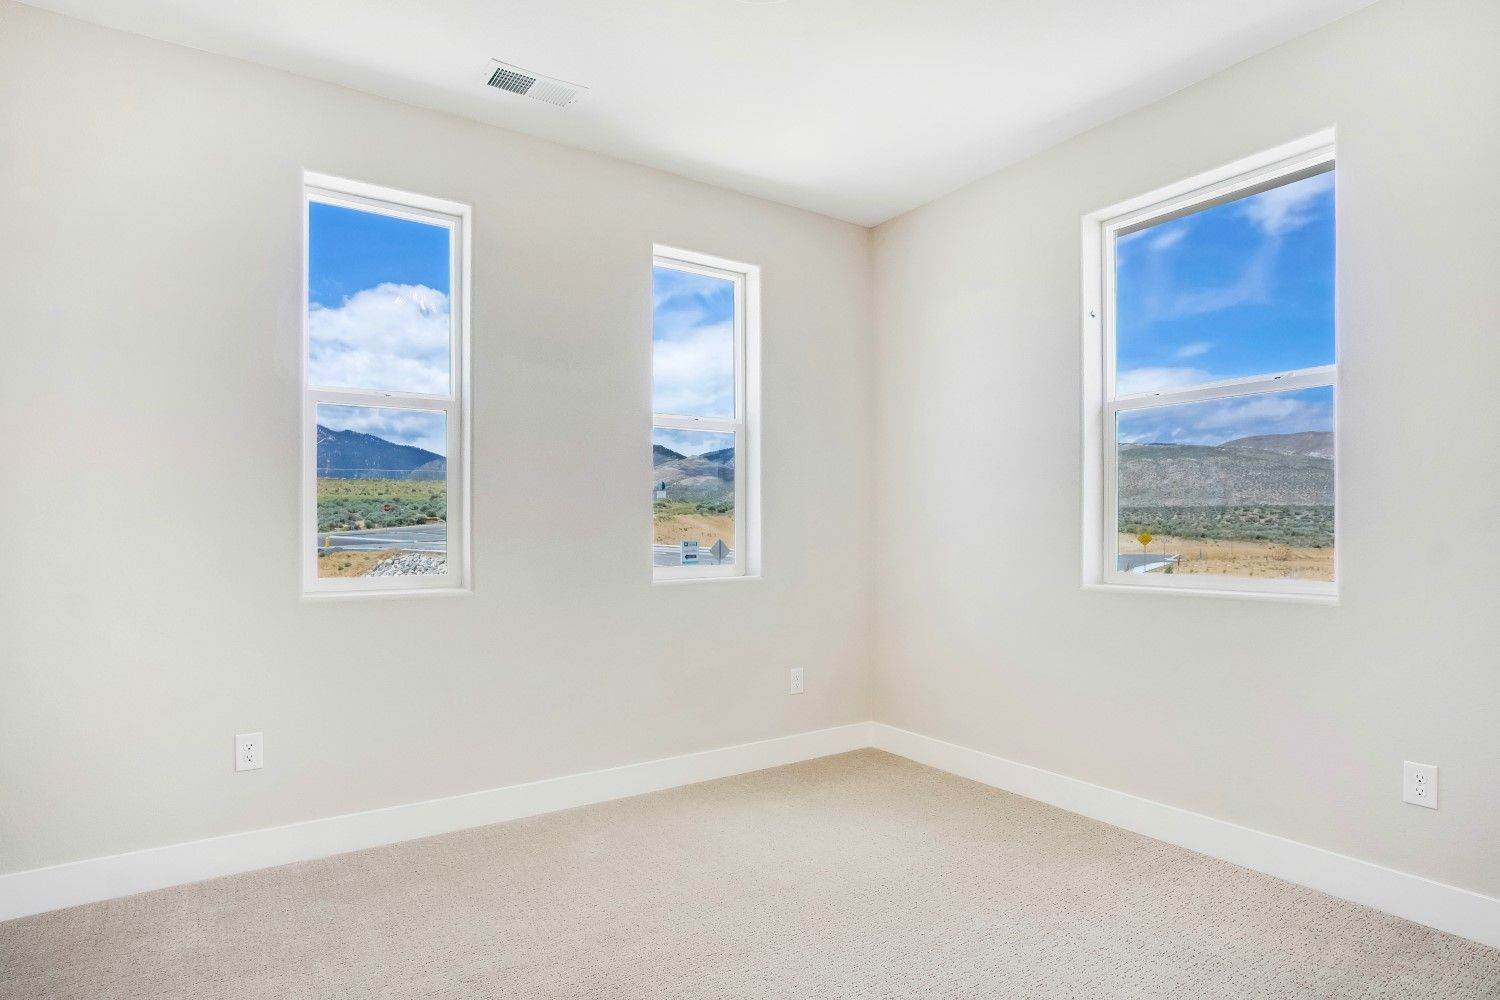 17. Village South at Valley Knolls building at 299 Radiant Drive, Carson City, NV 89705